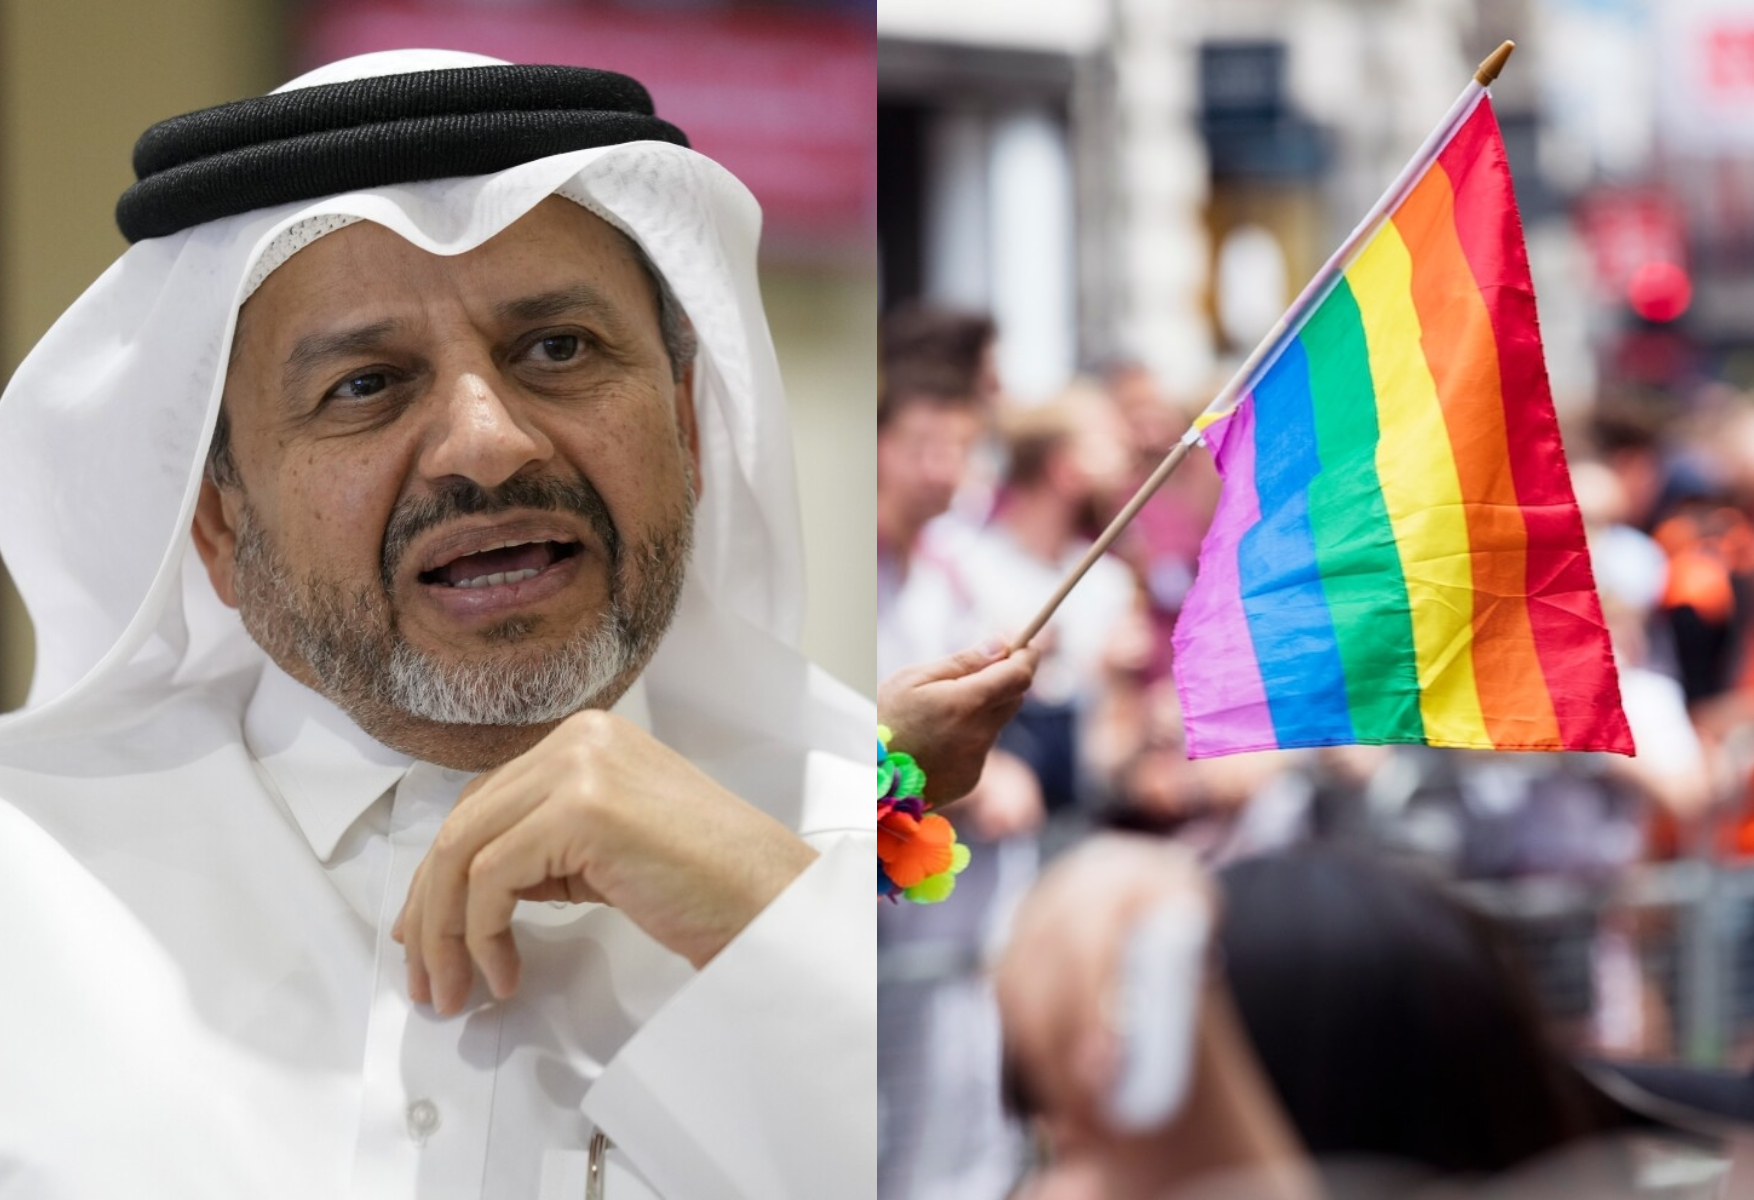 Qatar will not change its religion because of 28-day World Cup for LGBT groups